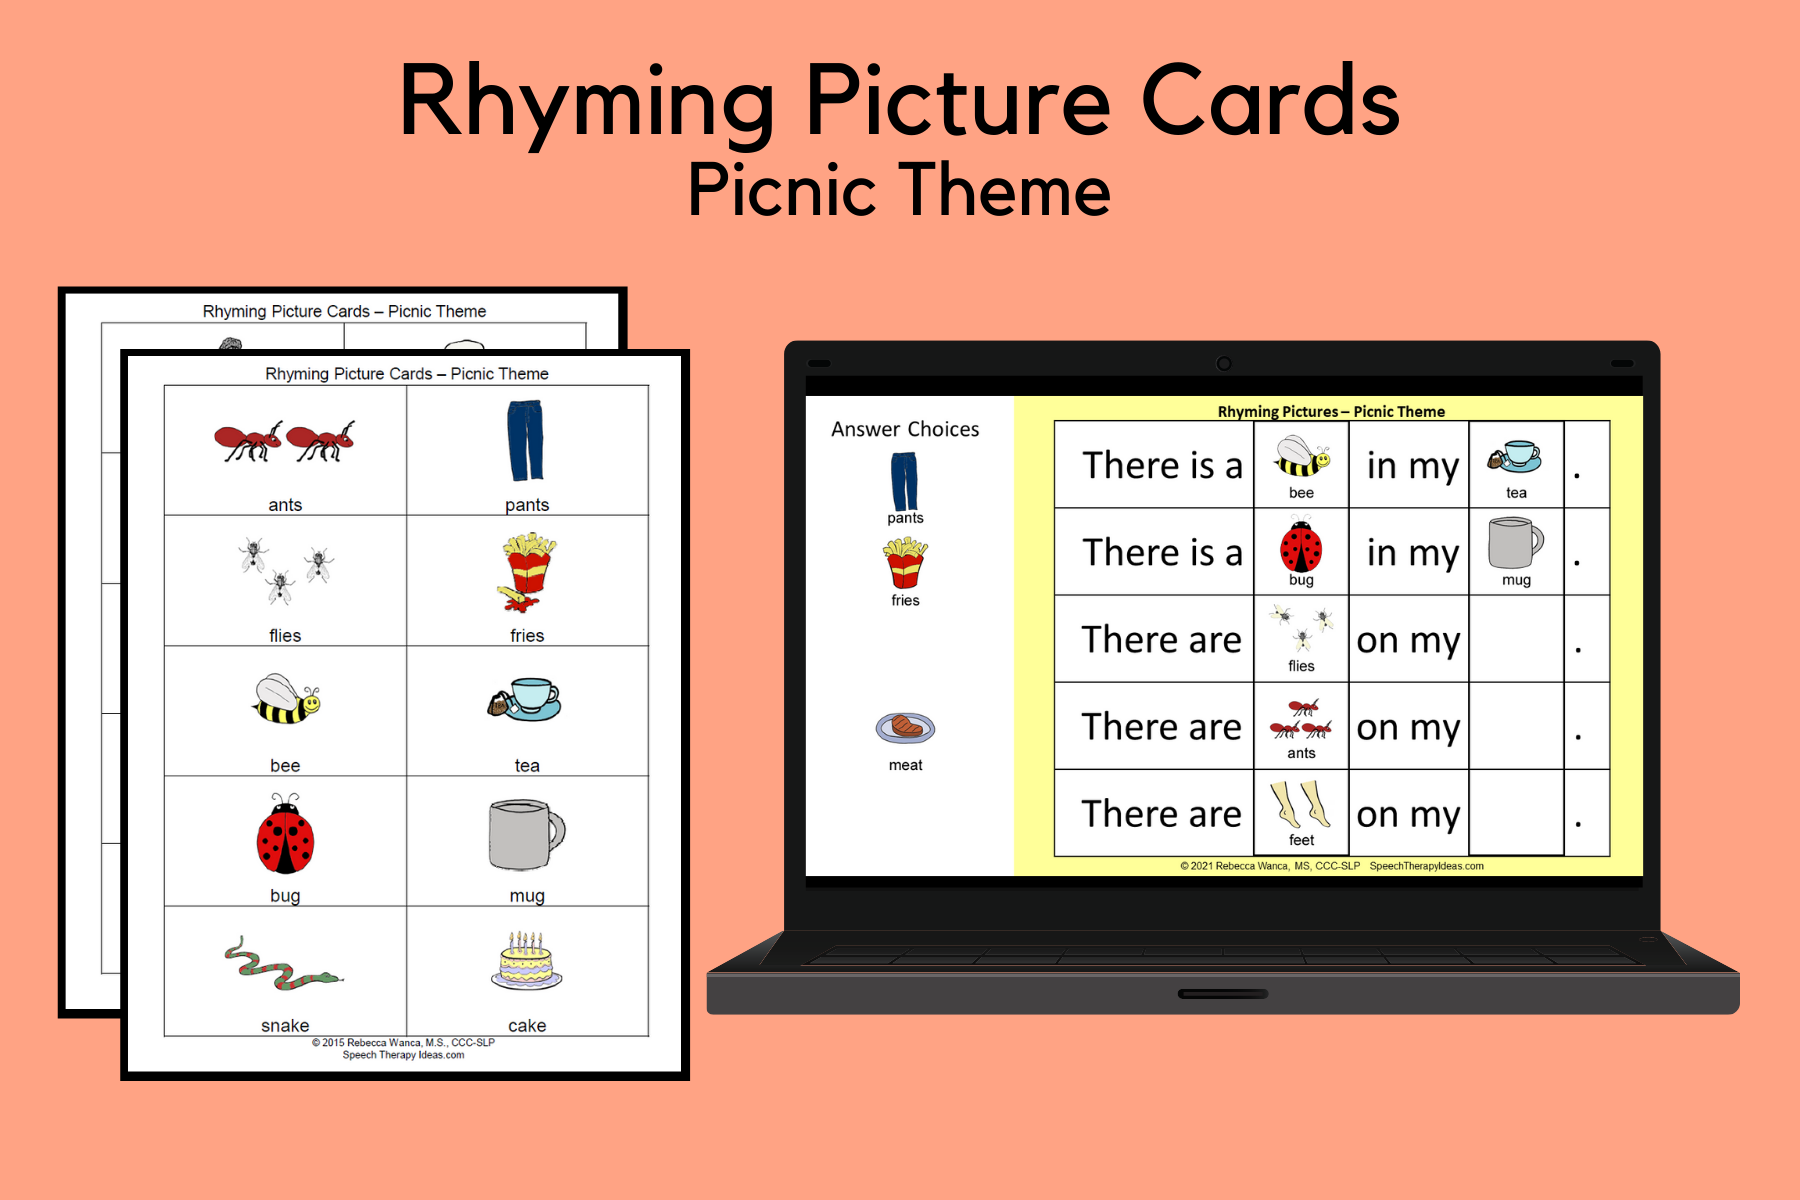 Rhyming Picture Cards – Picnic Theme